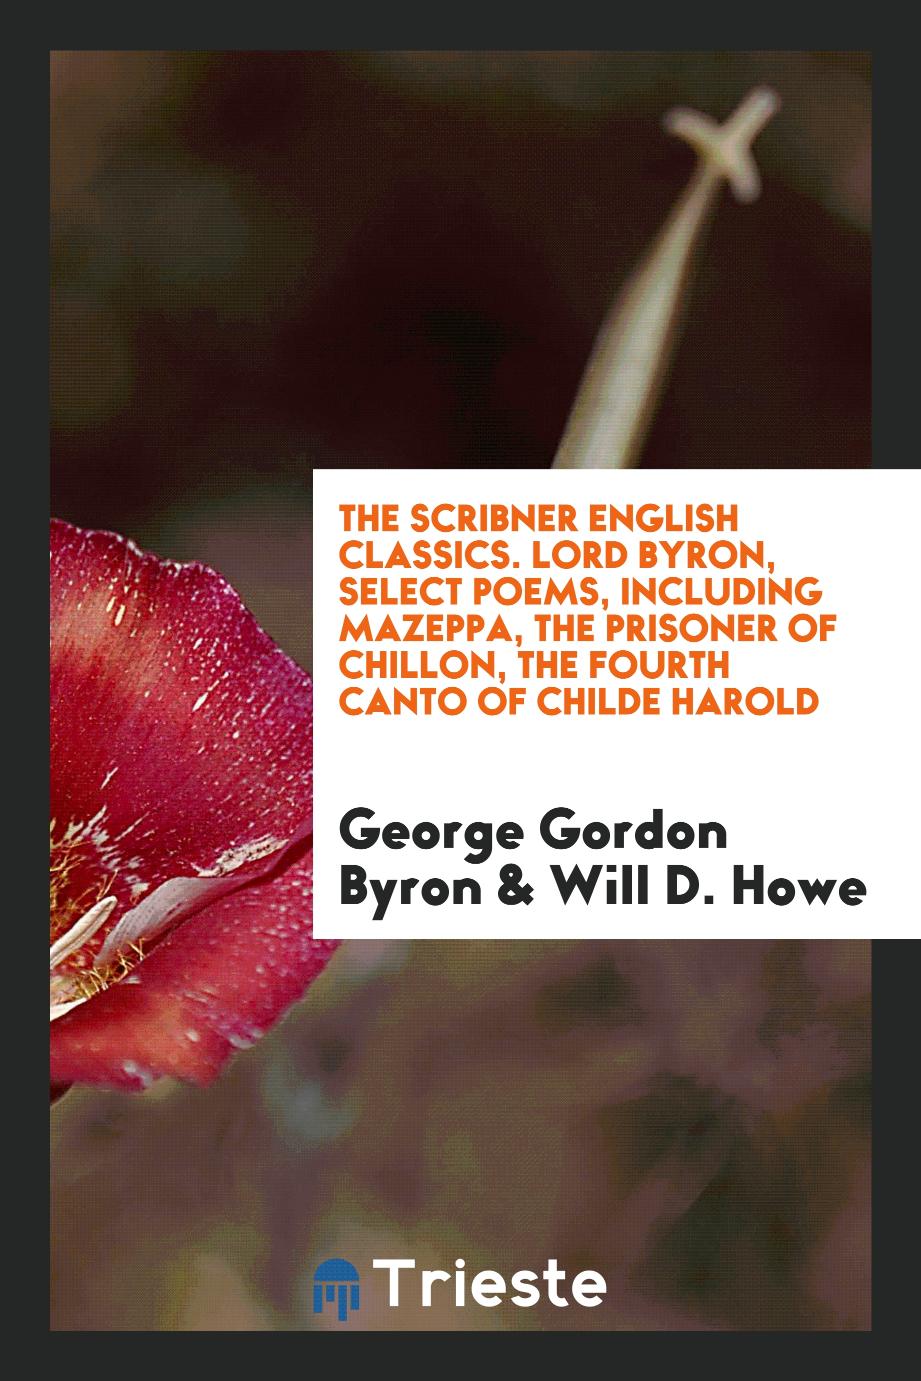 The Scribner English Classics. Lord Byron, Select Poems, Including Mazeppa, the Prisoner of Chillon, the Fourth Canto of Childe Harold